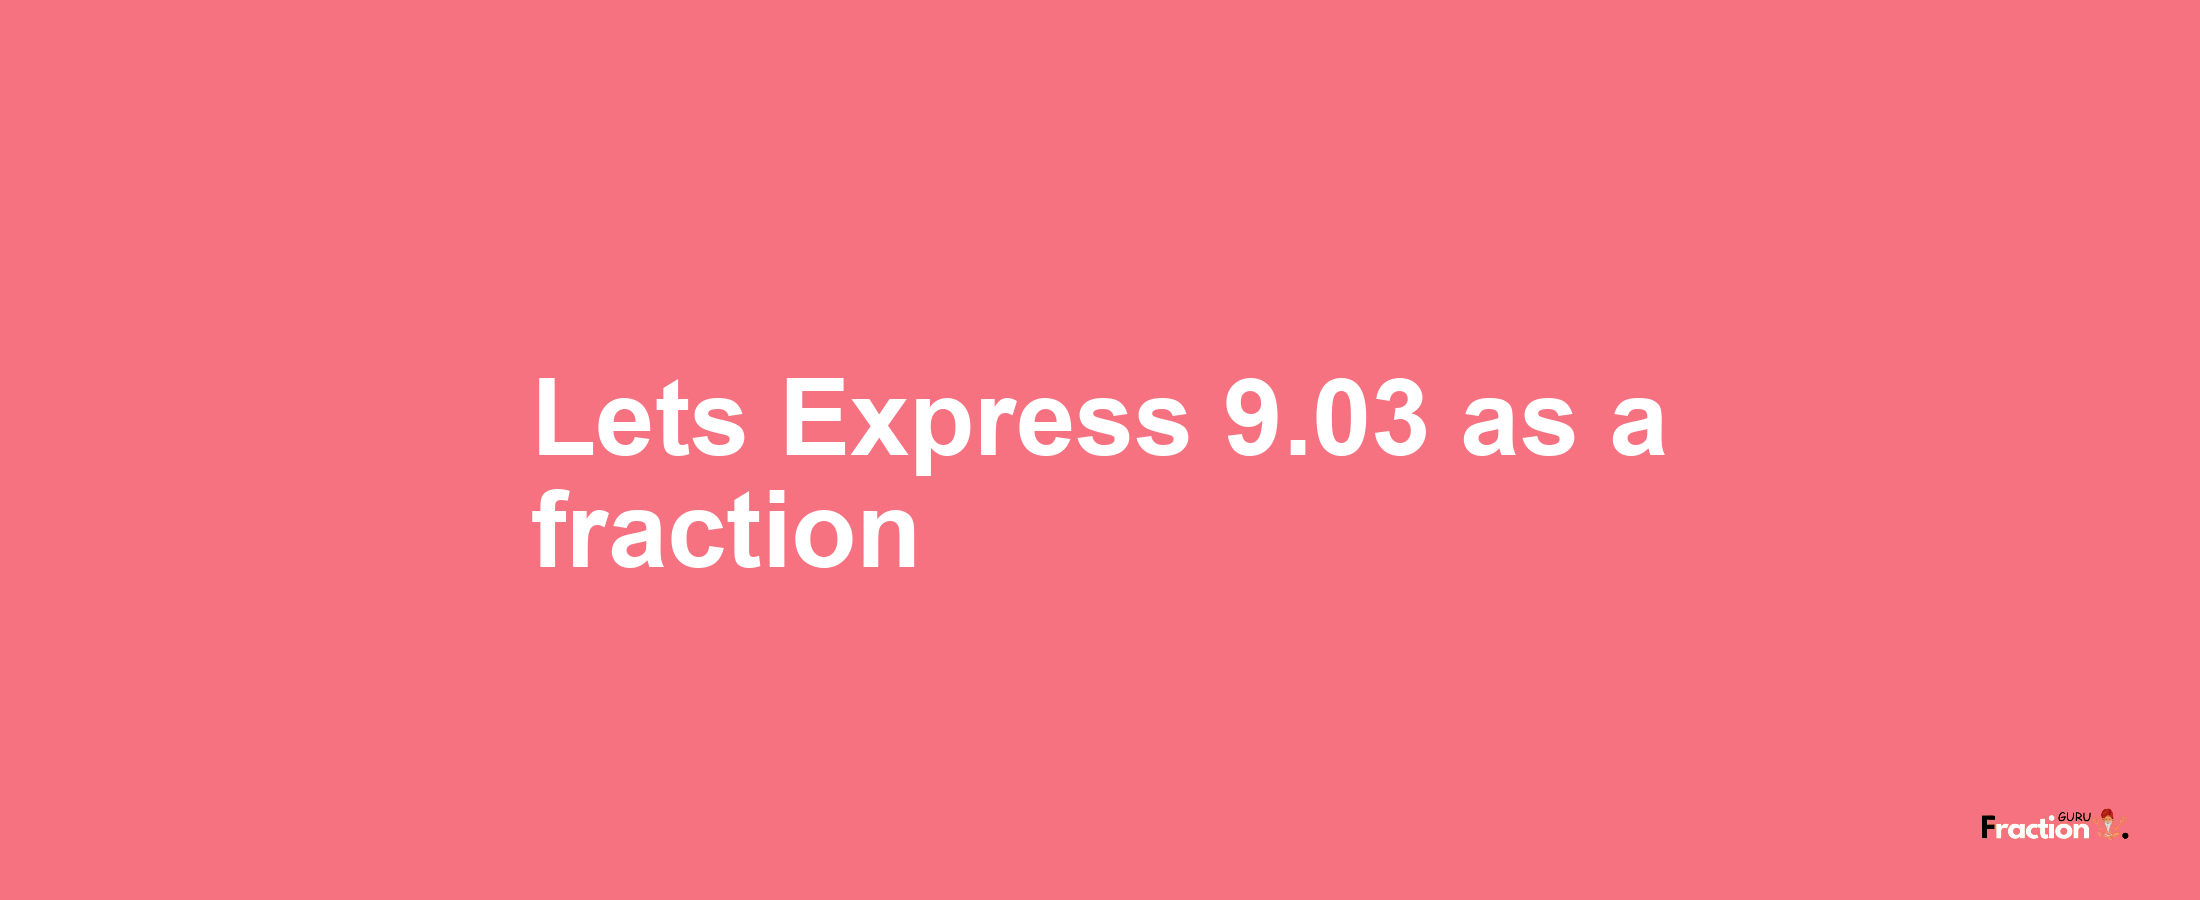 Lets Express 9.03 as afraction